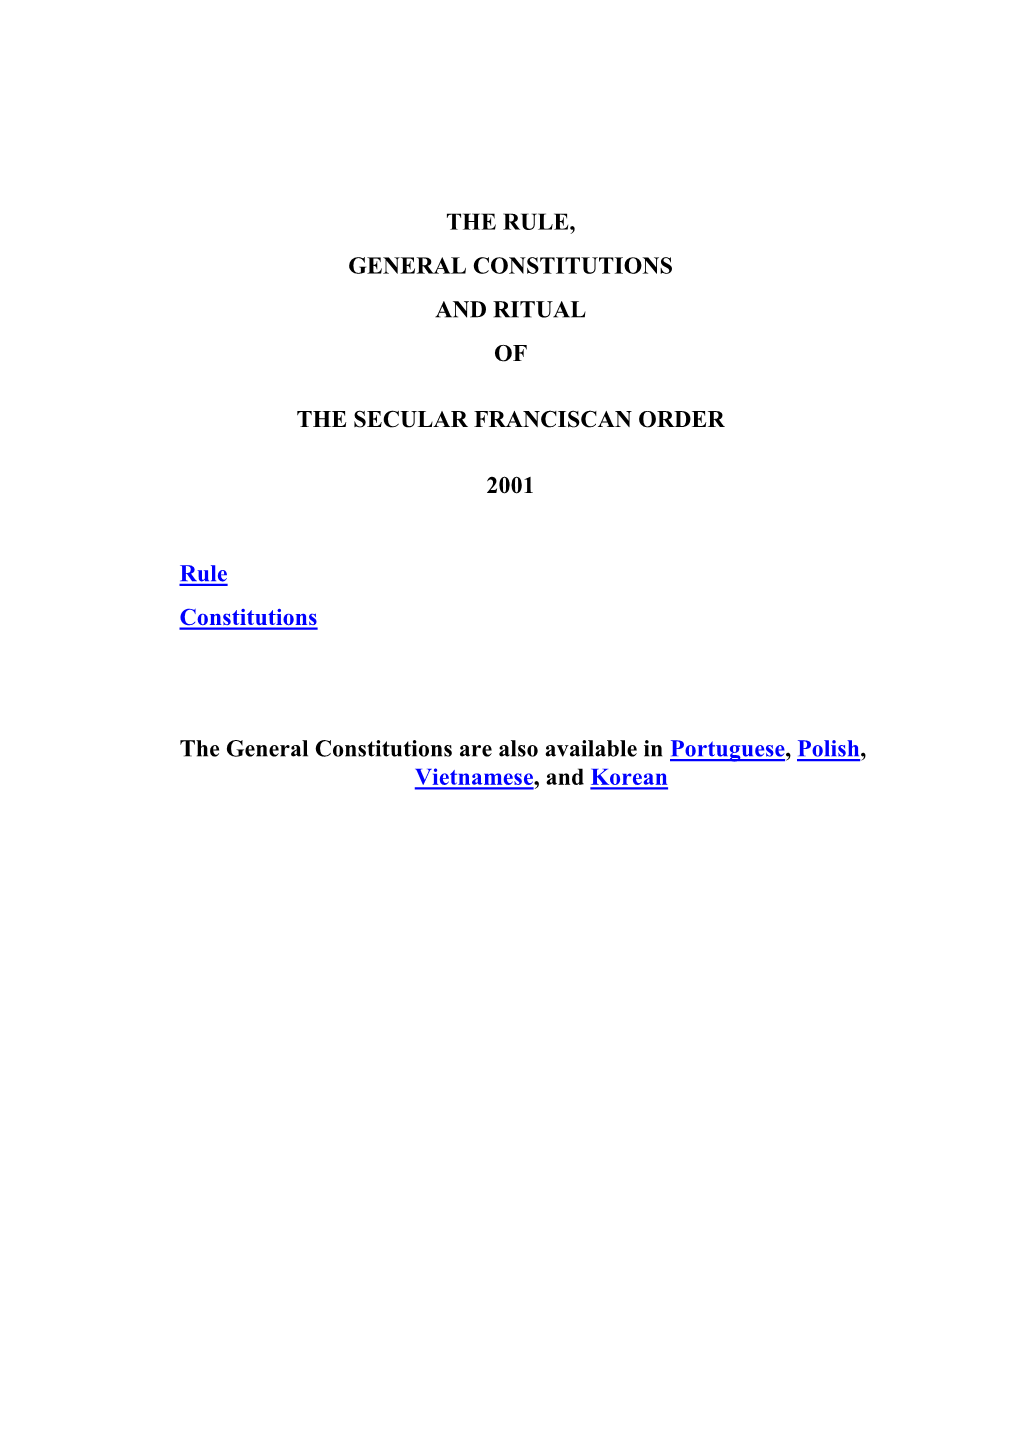 THE RULE, GENERAL CONSTITUTIONS and RITUAL of the SECULAR FRANCISCAN ORDER 2001 Rule Constitutions the General Constitutions Ar